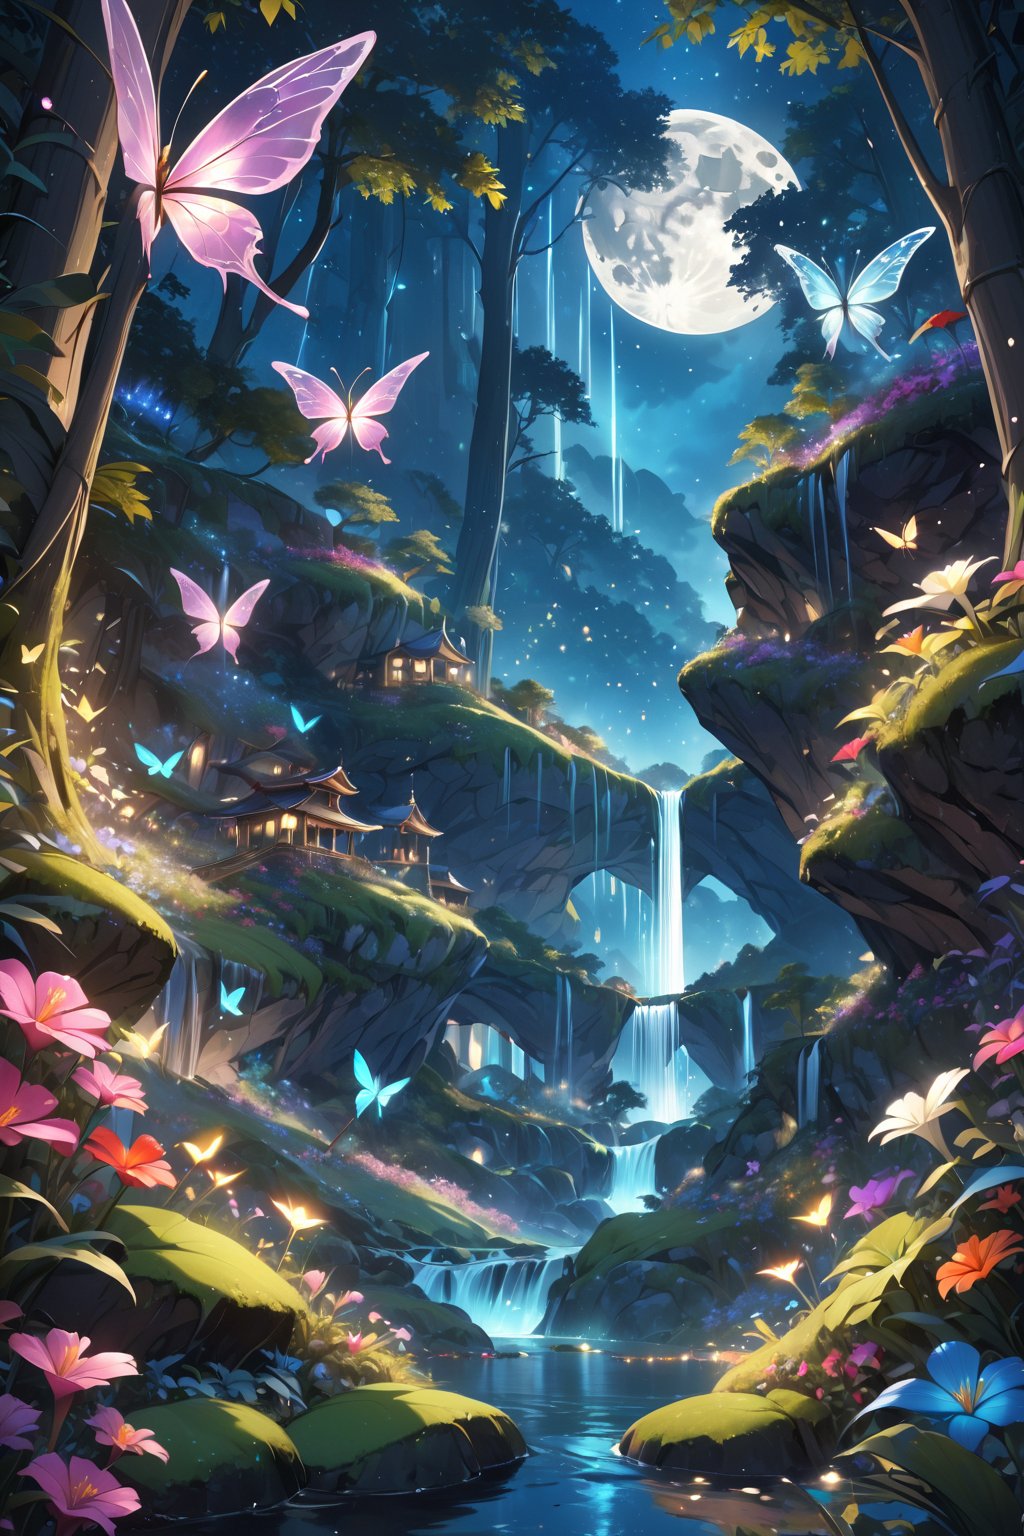 score_9, score_8_up, score_7_up, score_6_up, 
1 girl, beautiful elf girl, elf wings, Magic Forest, Night sky, moon, fireflies, waterfalls, magic elves, 
(Masterpiece, Best Quality, 8k:1.2), (Ultra-Detailed, Highres, Extremely Detailed, Absurdres, Incredibly Absurdres, Huge Filesize:1.1), (Photorealistic:1.3), By Futurevolab, Portrait, Ultra-Realistic Illustration, Digital Painting. ,Strong Backlit Particles,Butterfly Style